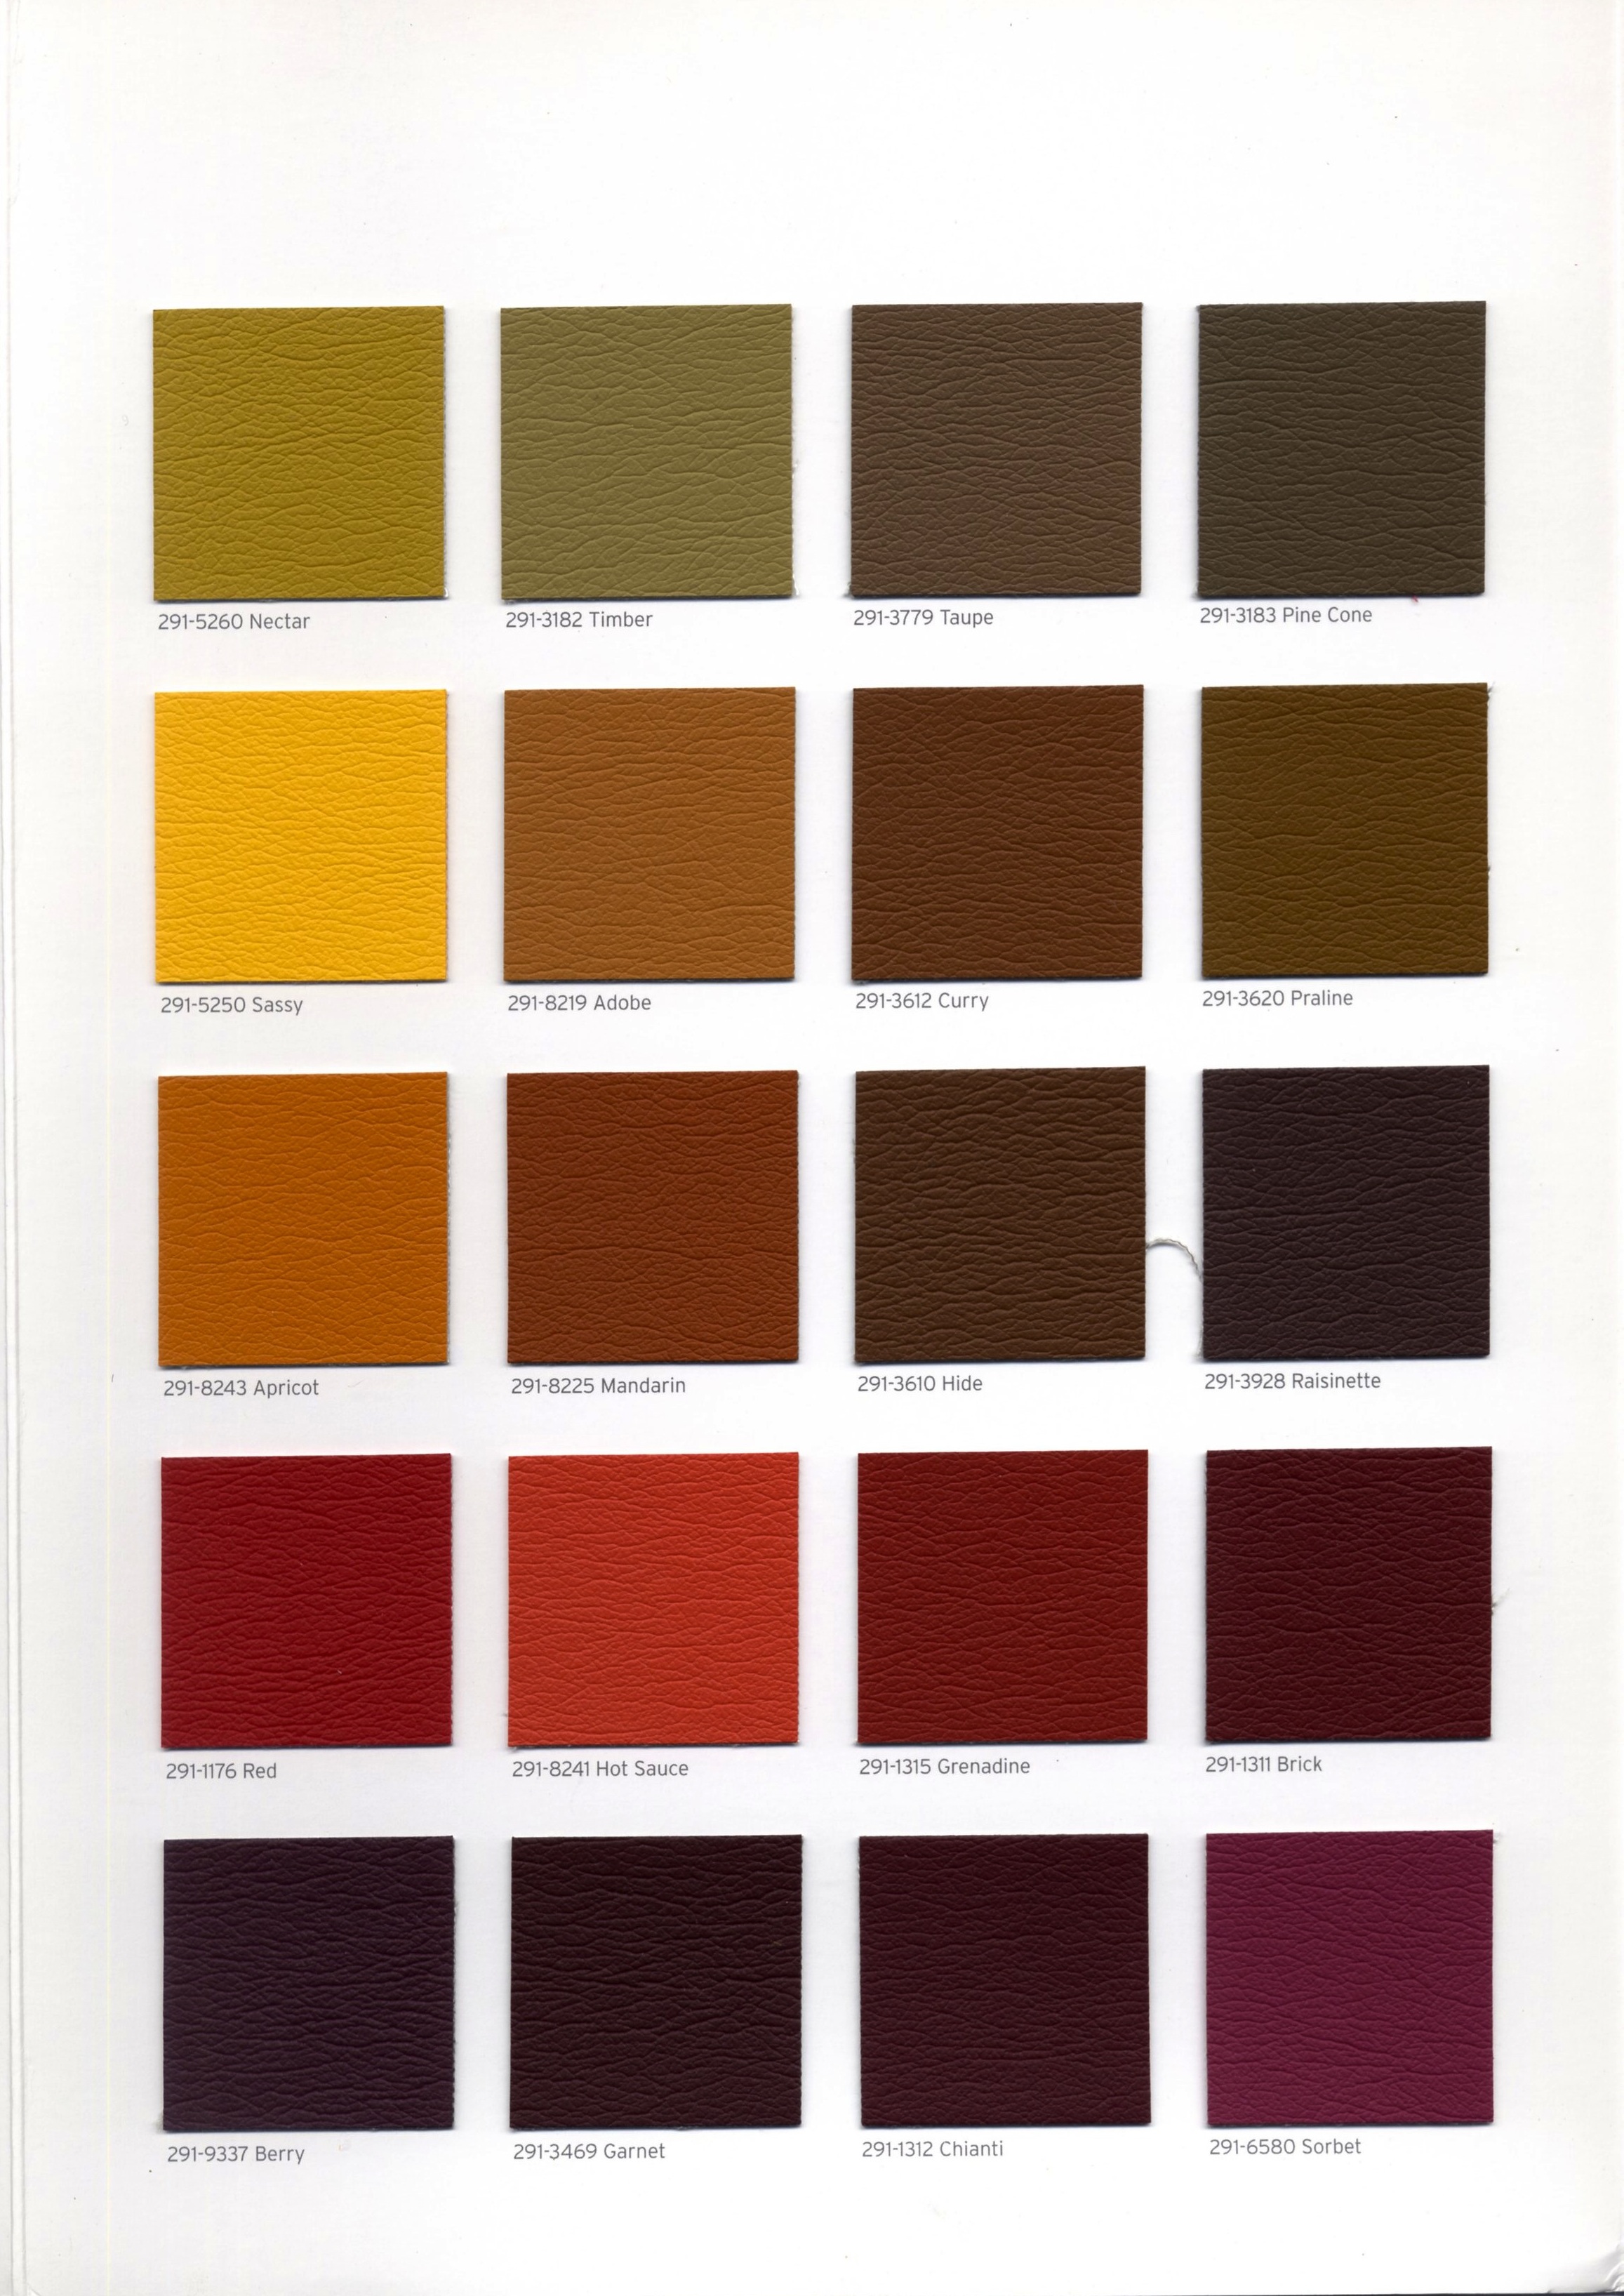 leather color chart